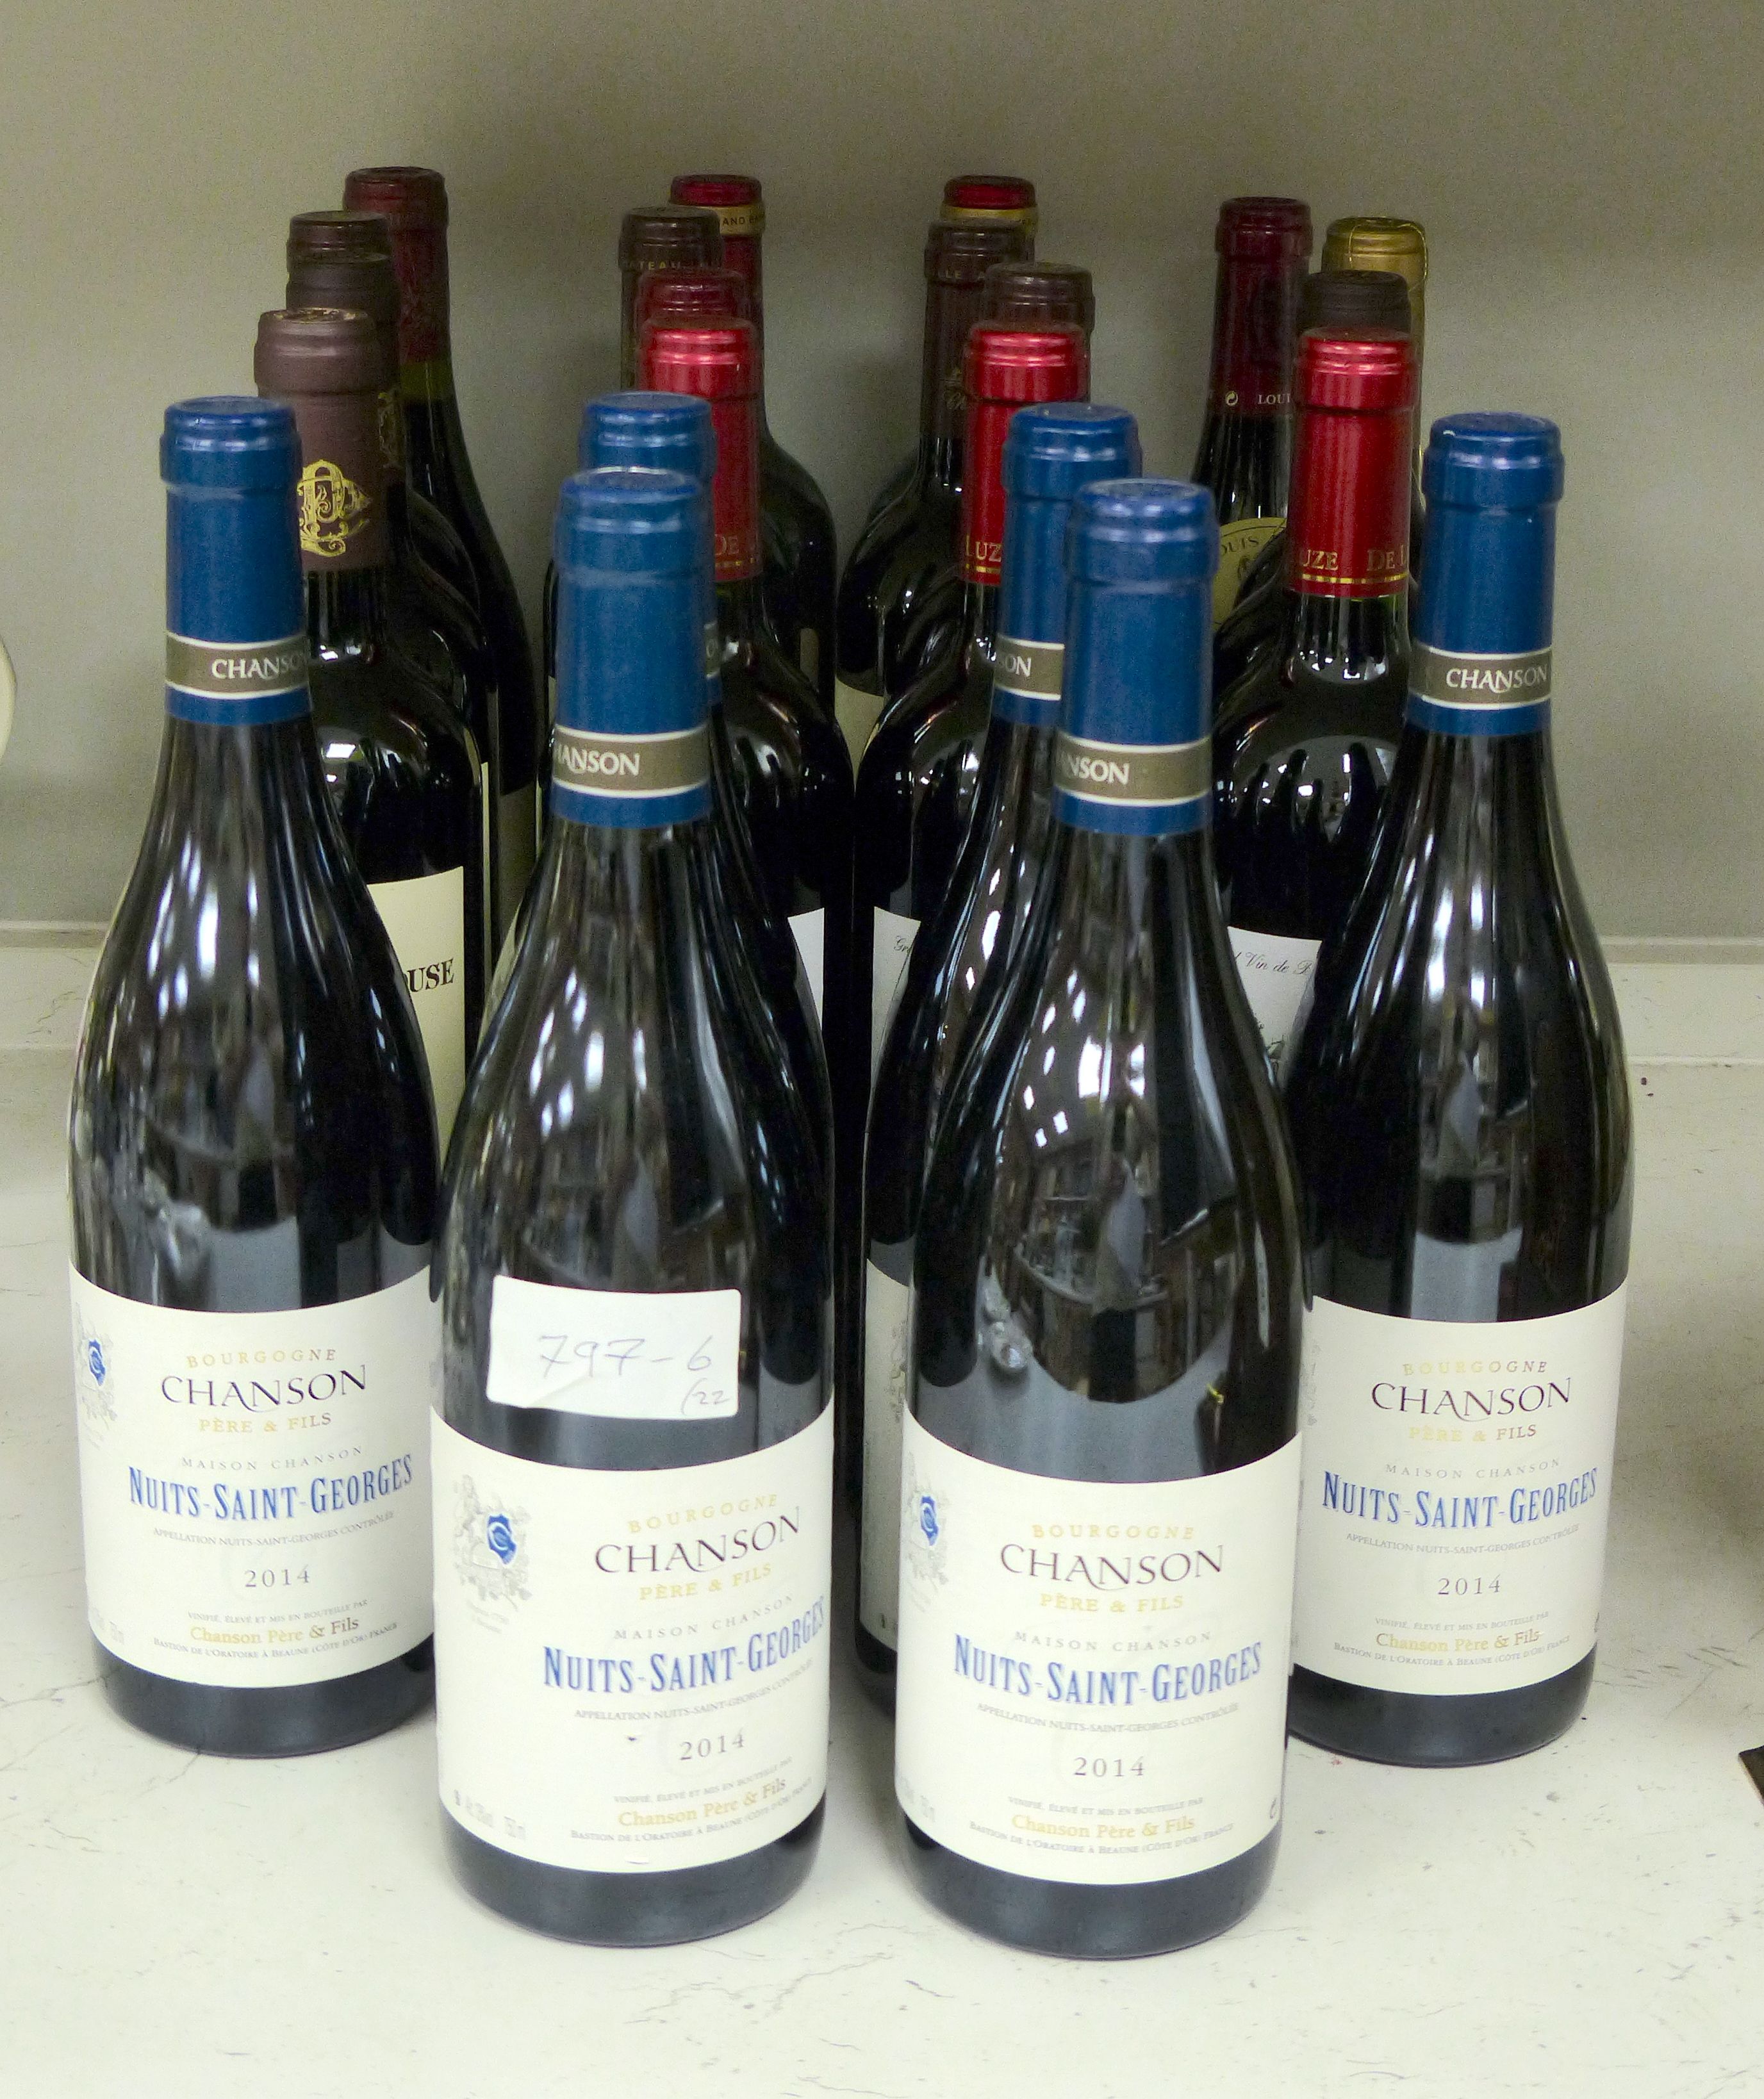 Twenty two assorted bottles of red wine including six Nuit St Georges Chanson Pere & Fils, 2014, two Gevrey Chambertin, Louis Jadot, 2003, three Chateau Gambon La Pelouse, 2013 and four Chateau Barrayres, 2012 (see image